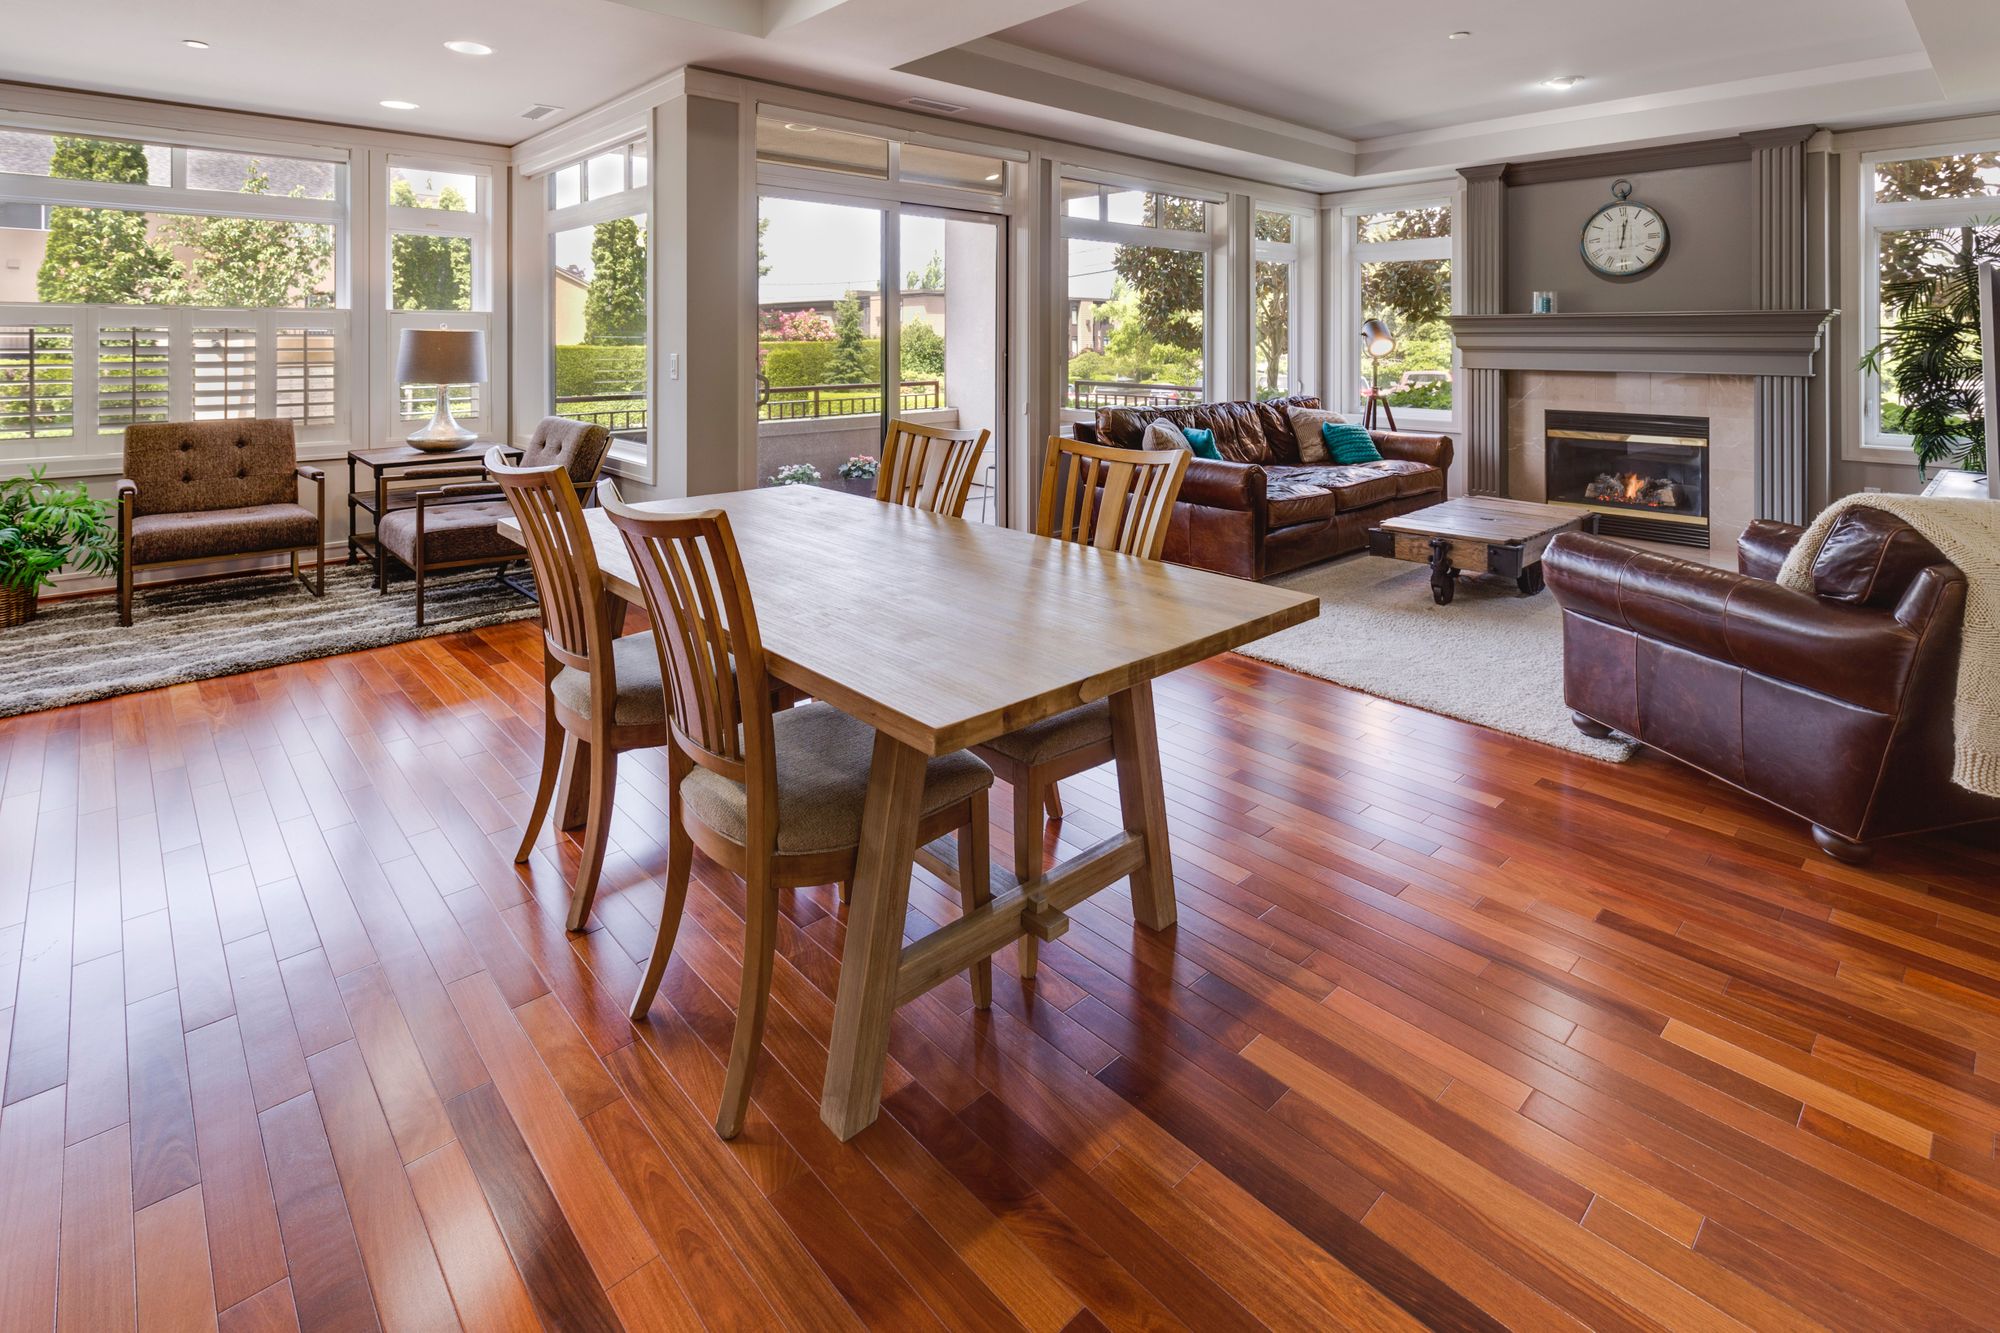 Do Hardwood Floors Increase Home Value, How Much Does It Cost To Put New Hardwood Floors